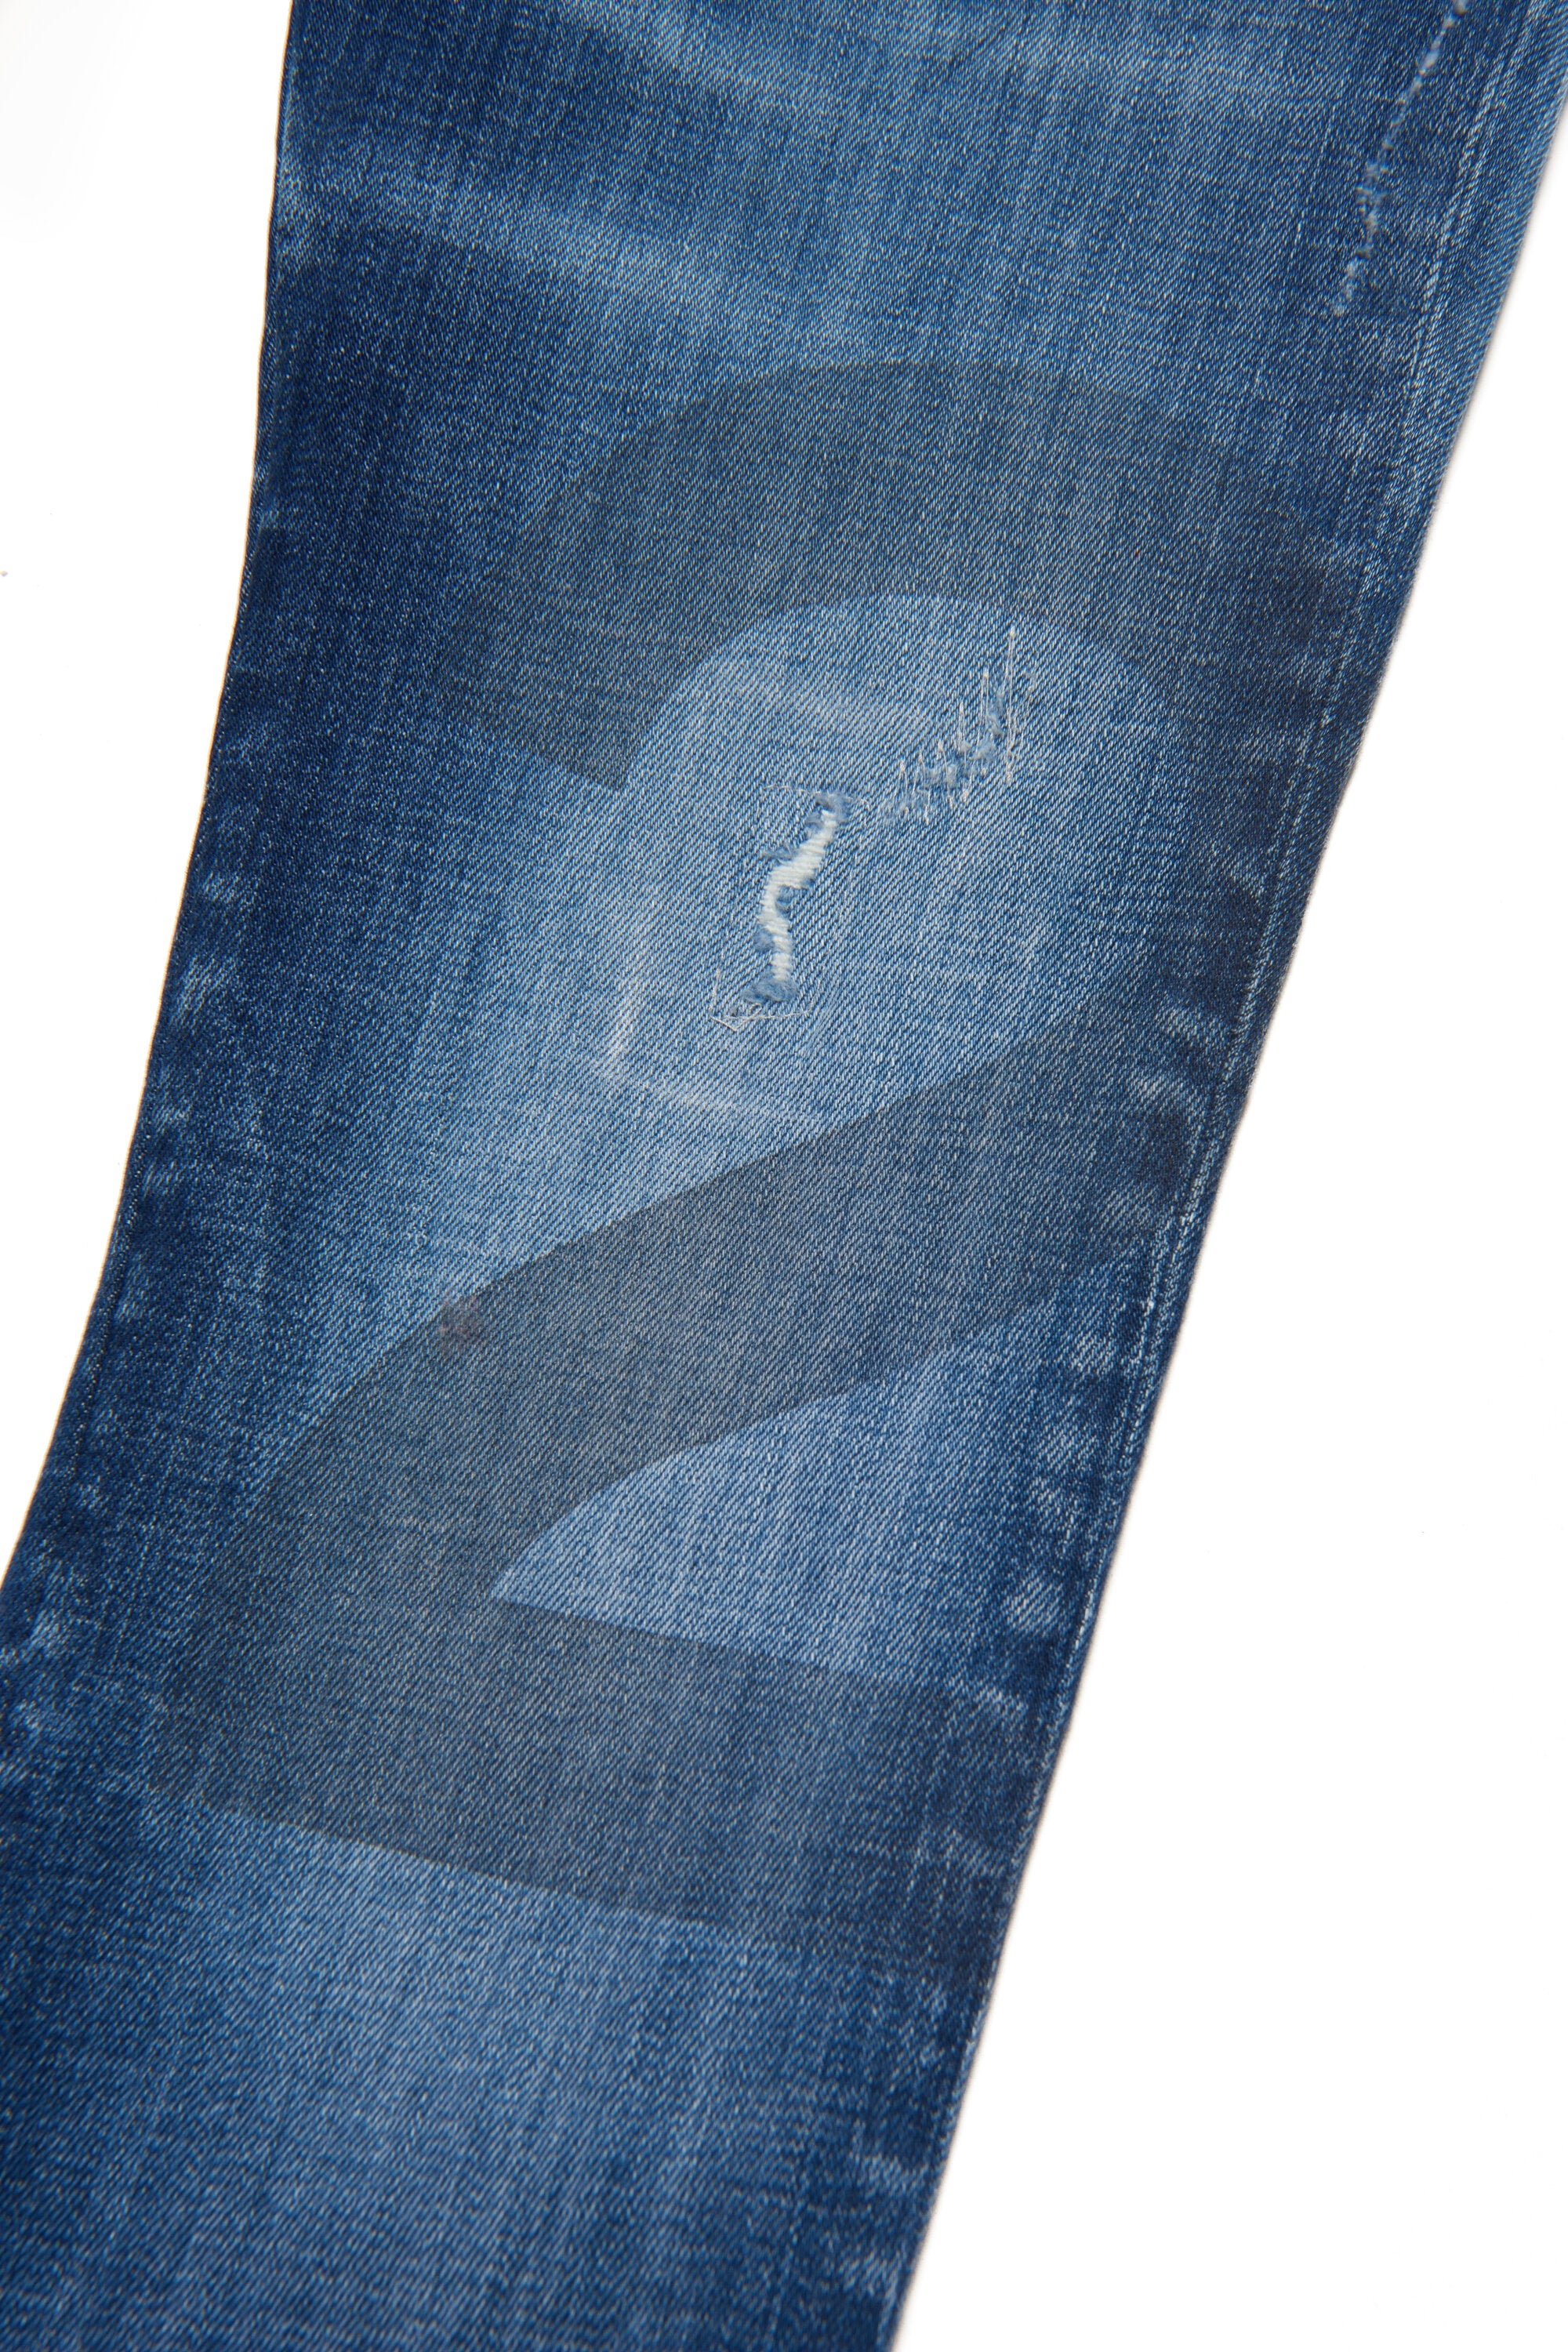 Clement jeans straight medium blue shaded with abrasions